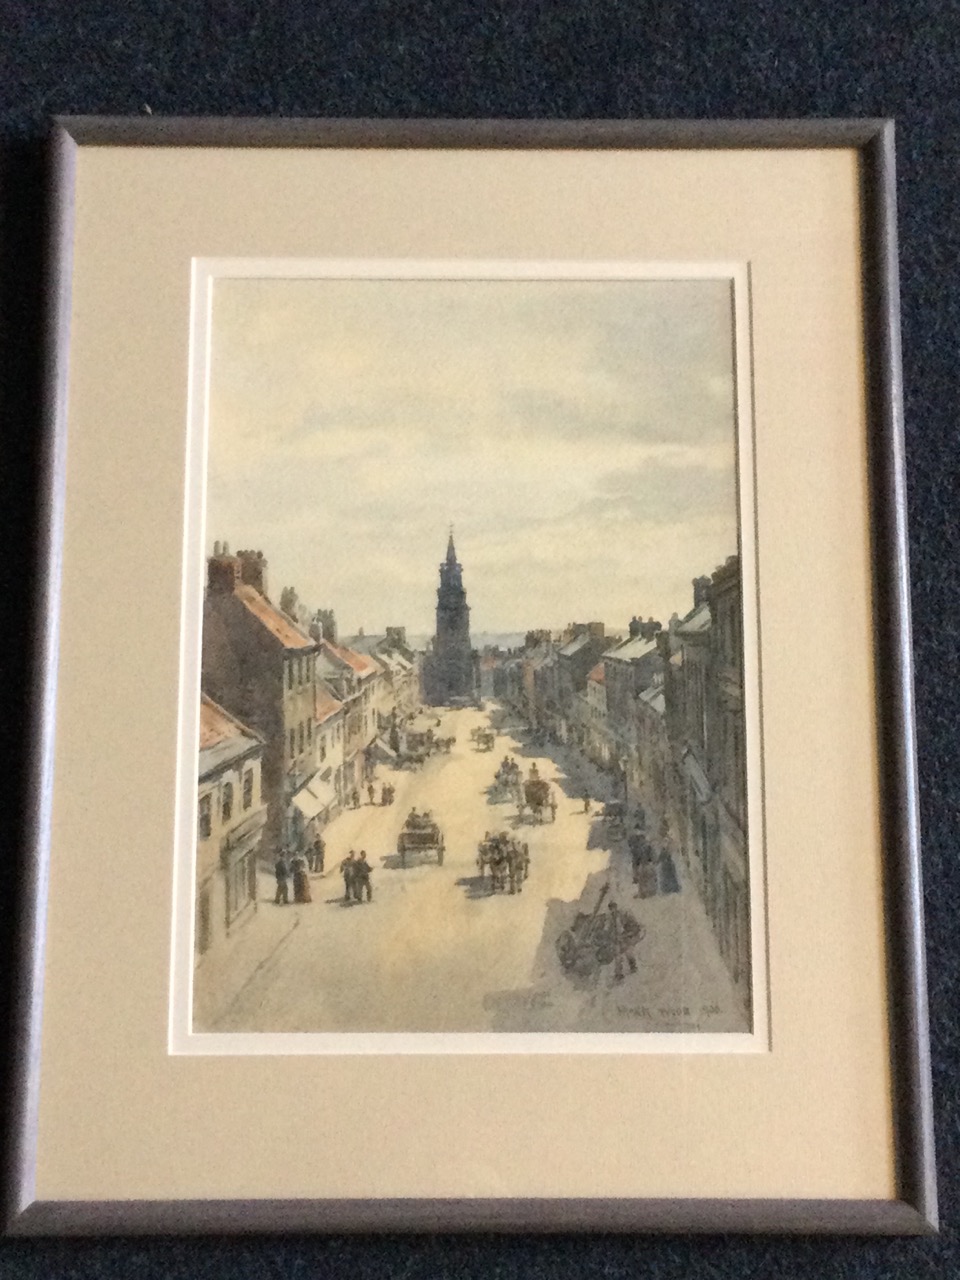 Frank Watson Wood, watercolour, view of Berwick upon Tweed looking down Marygate to the town hall, - Image 3 of 3